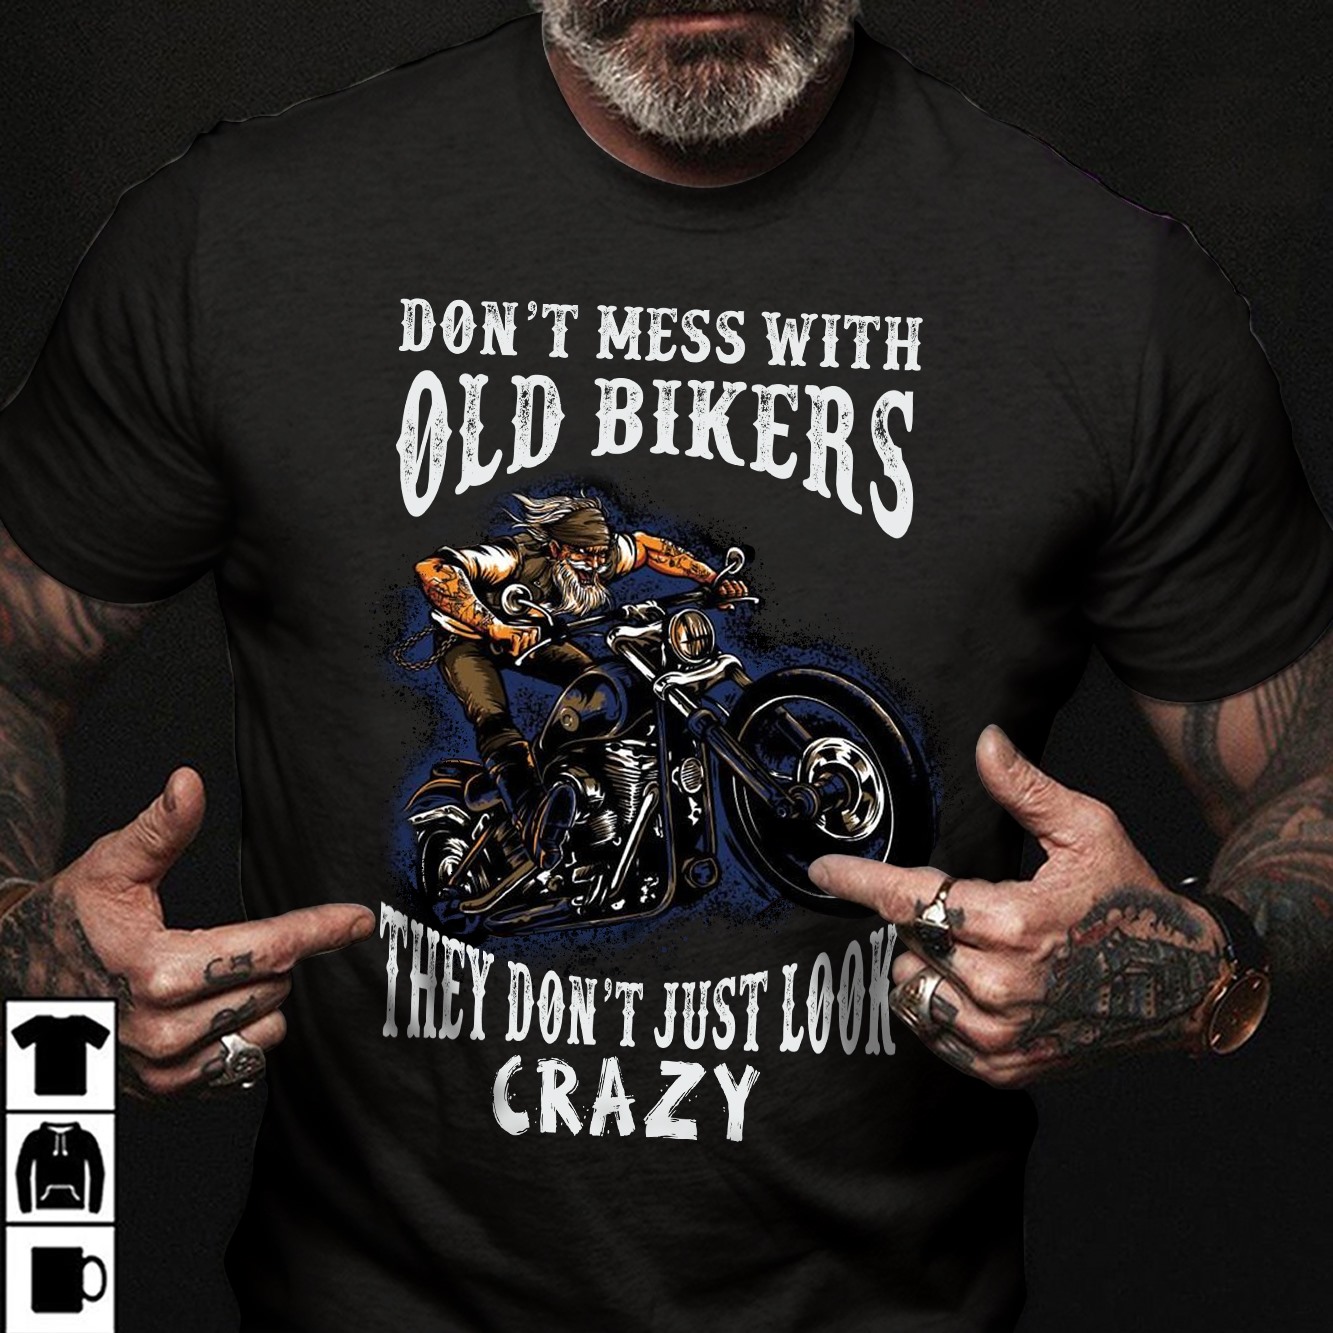 Don't mess with old bikers they don't just look crazy